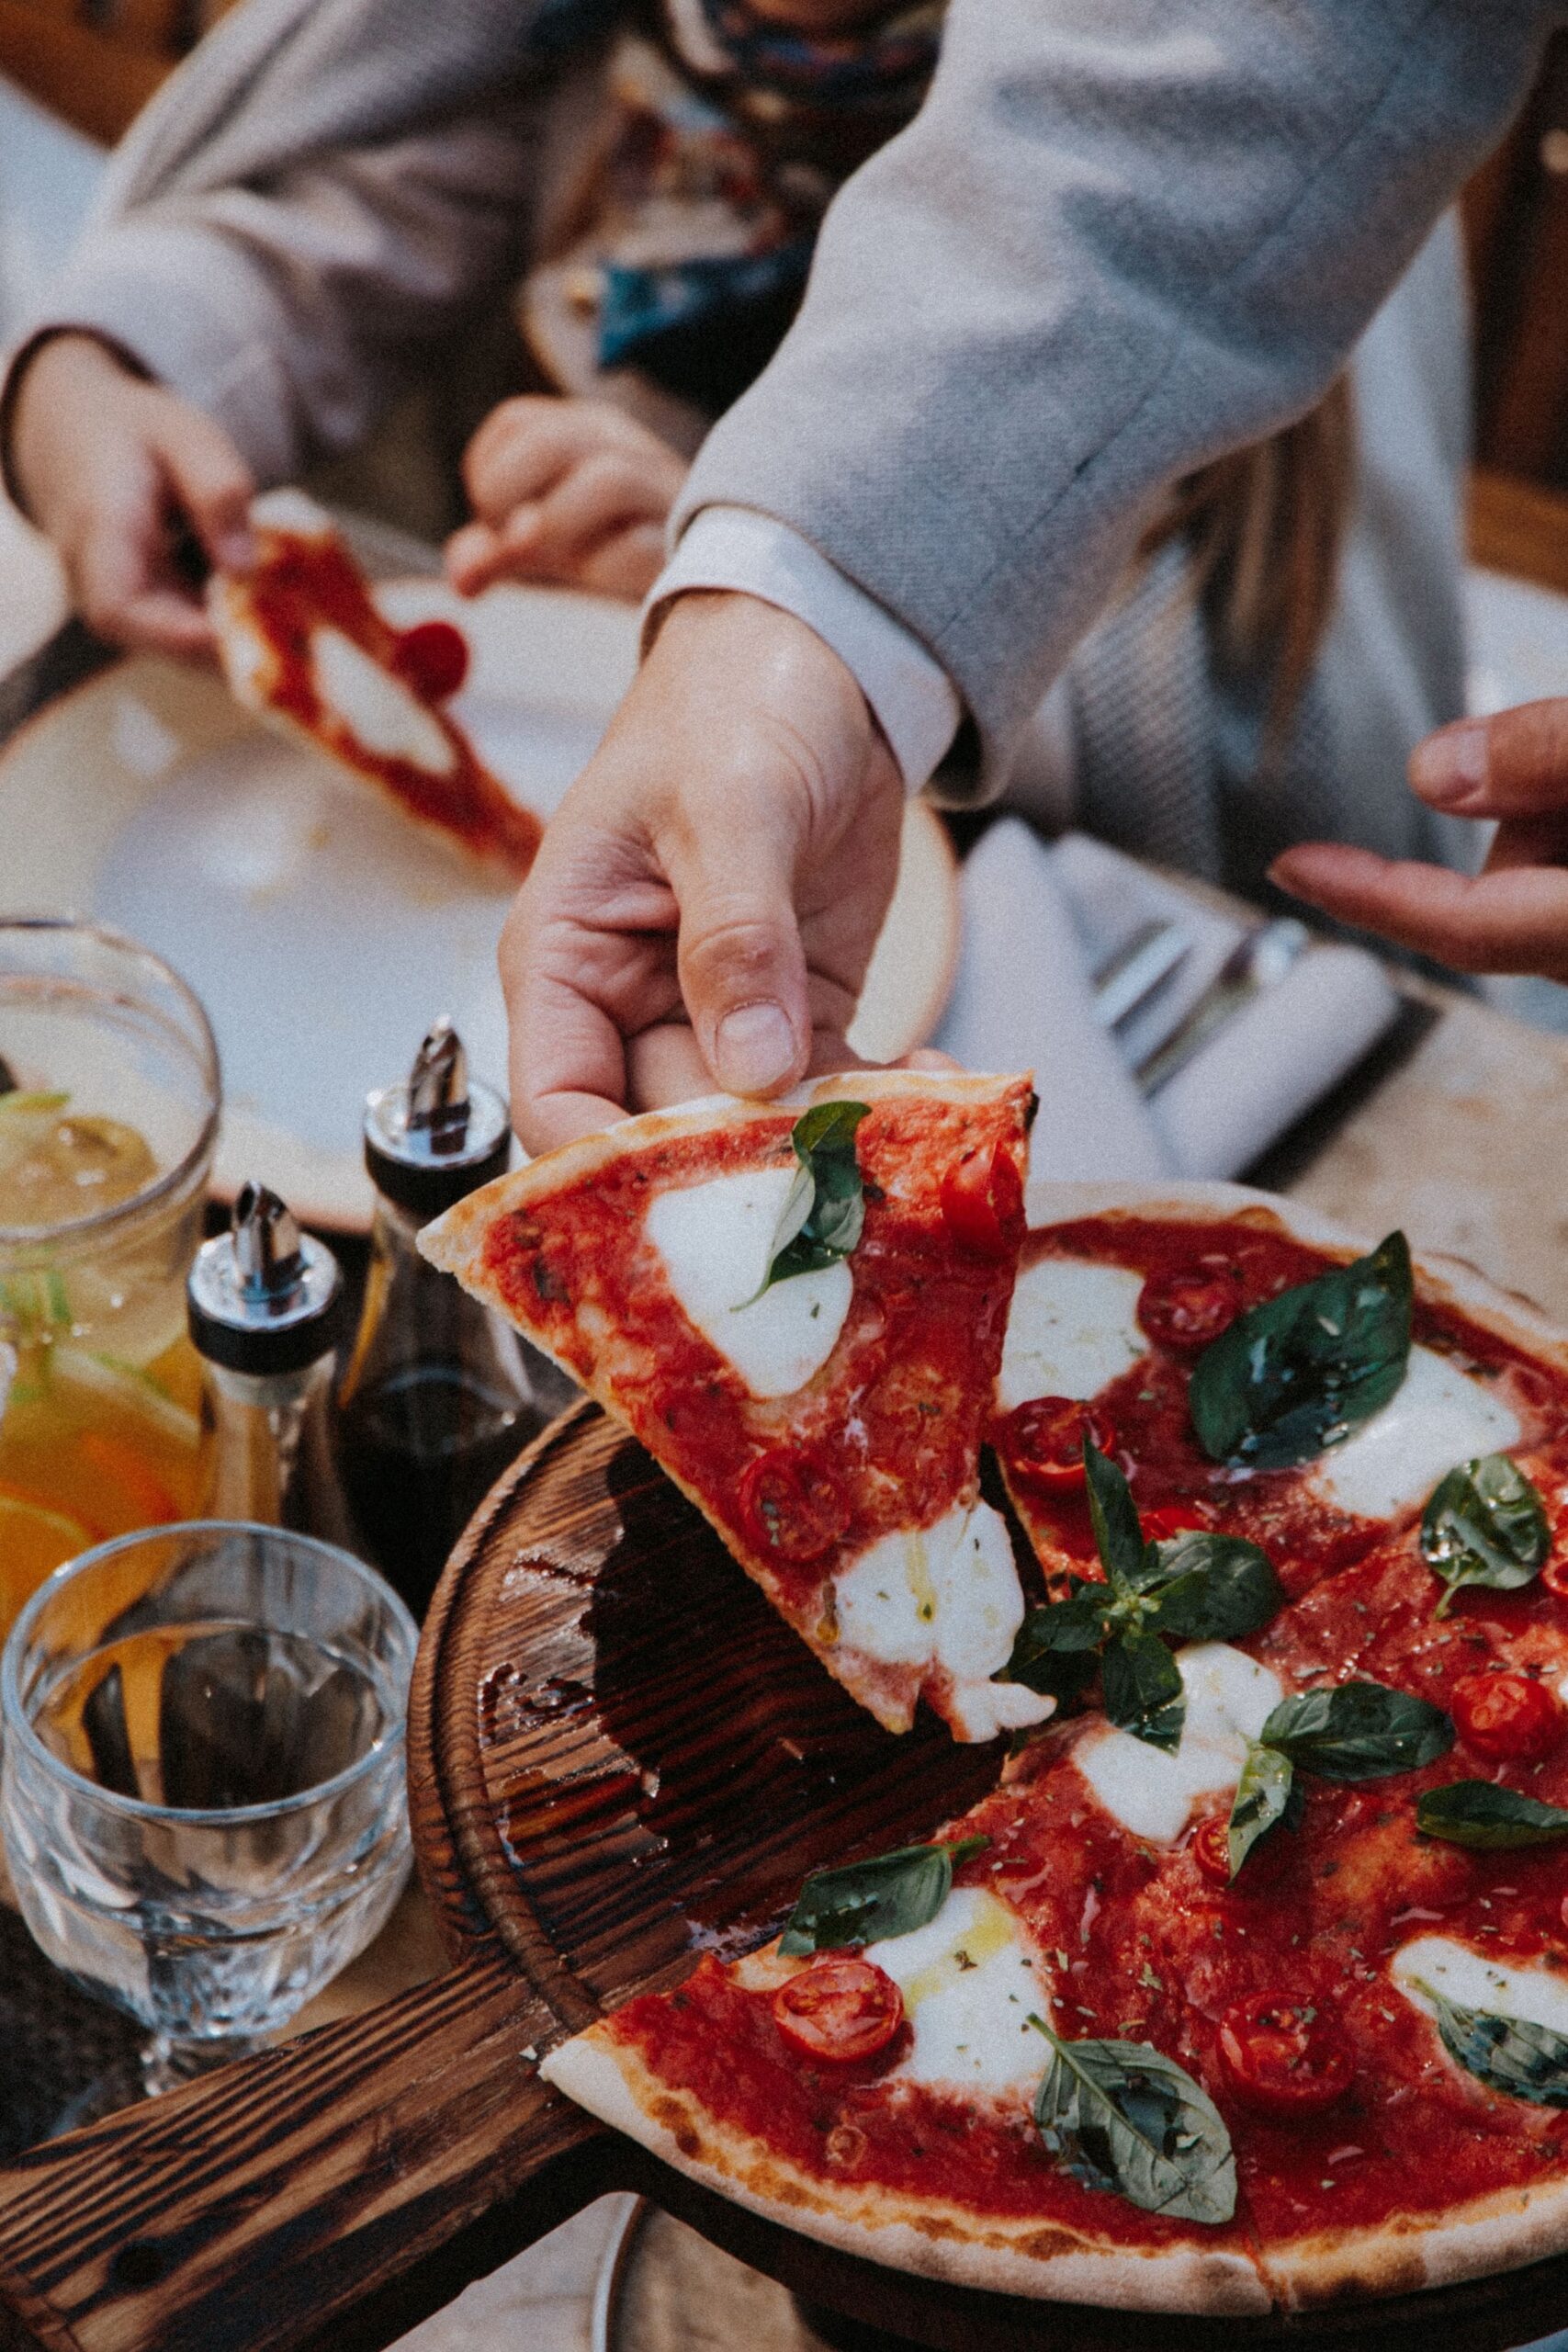 An image of someone grabbing a slice of Neapolitan pizza.